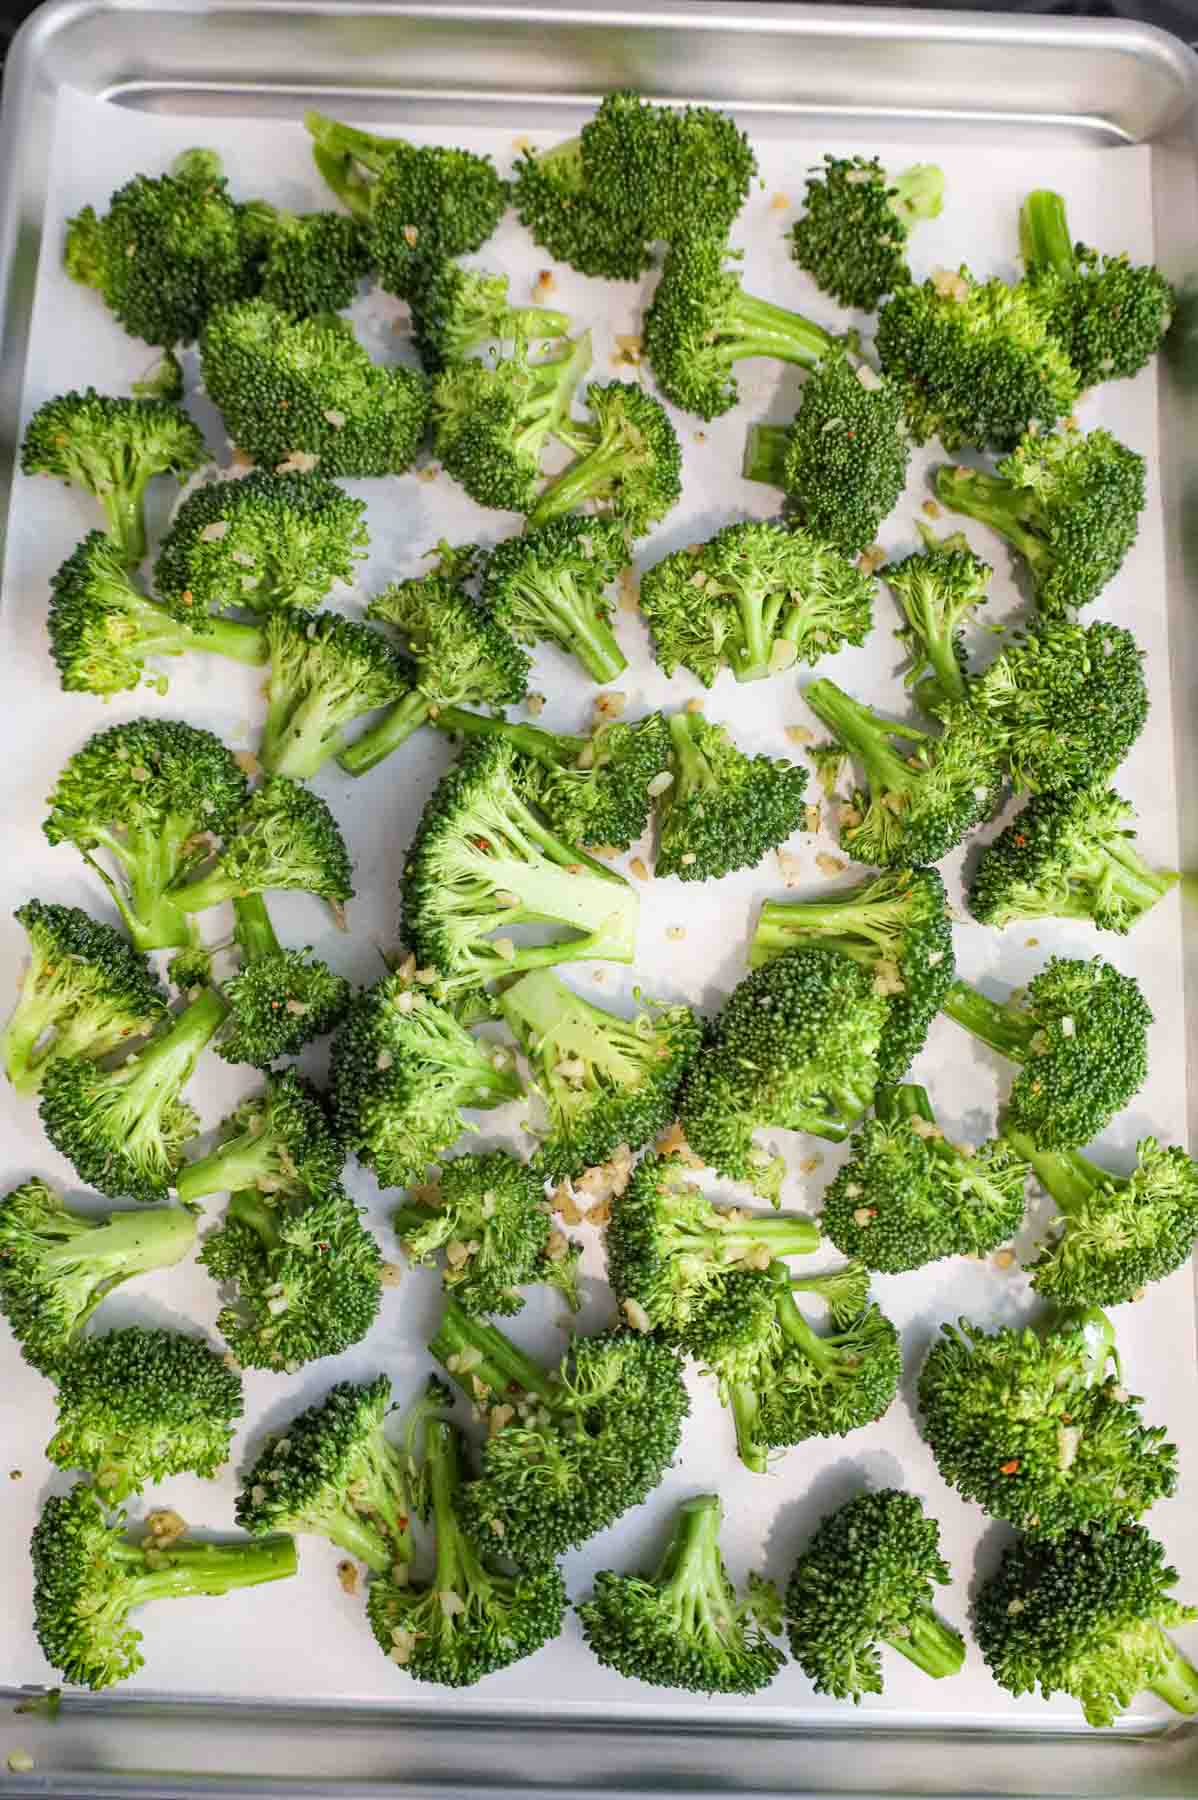 broccoli florets tossed in seasoning and olive oil on a parchment lined baking sheet